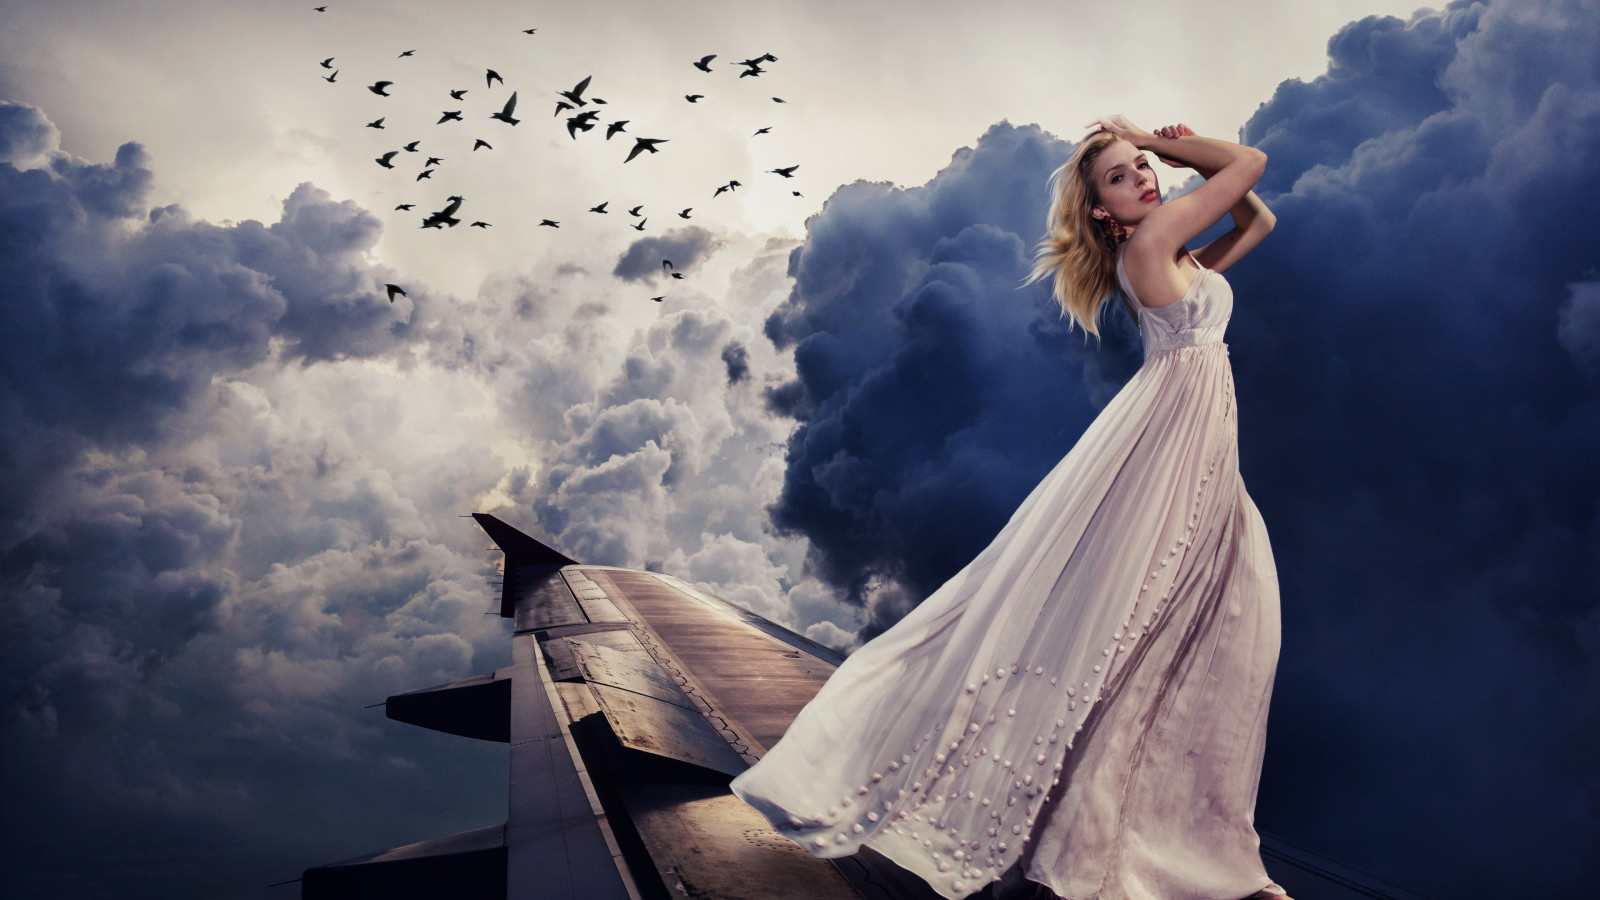 Beautiful girl on the airplane wing wallpaper 1600x900